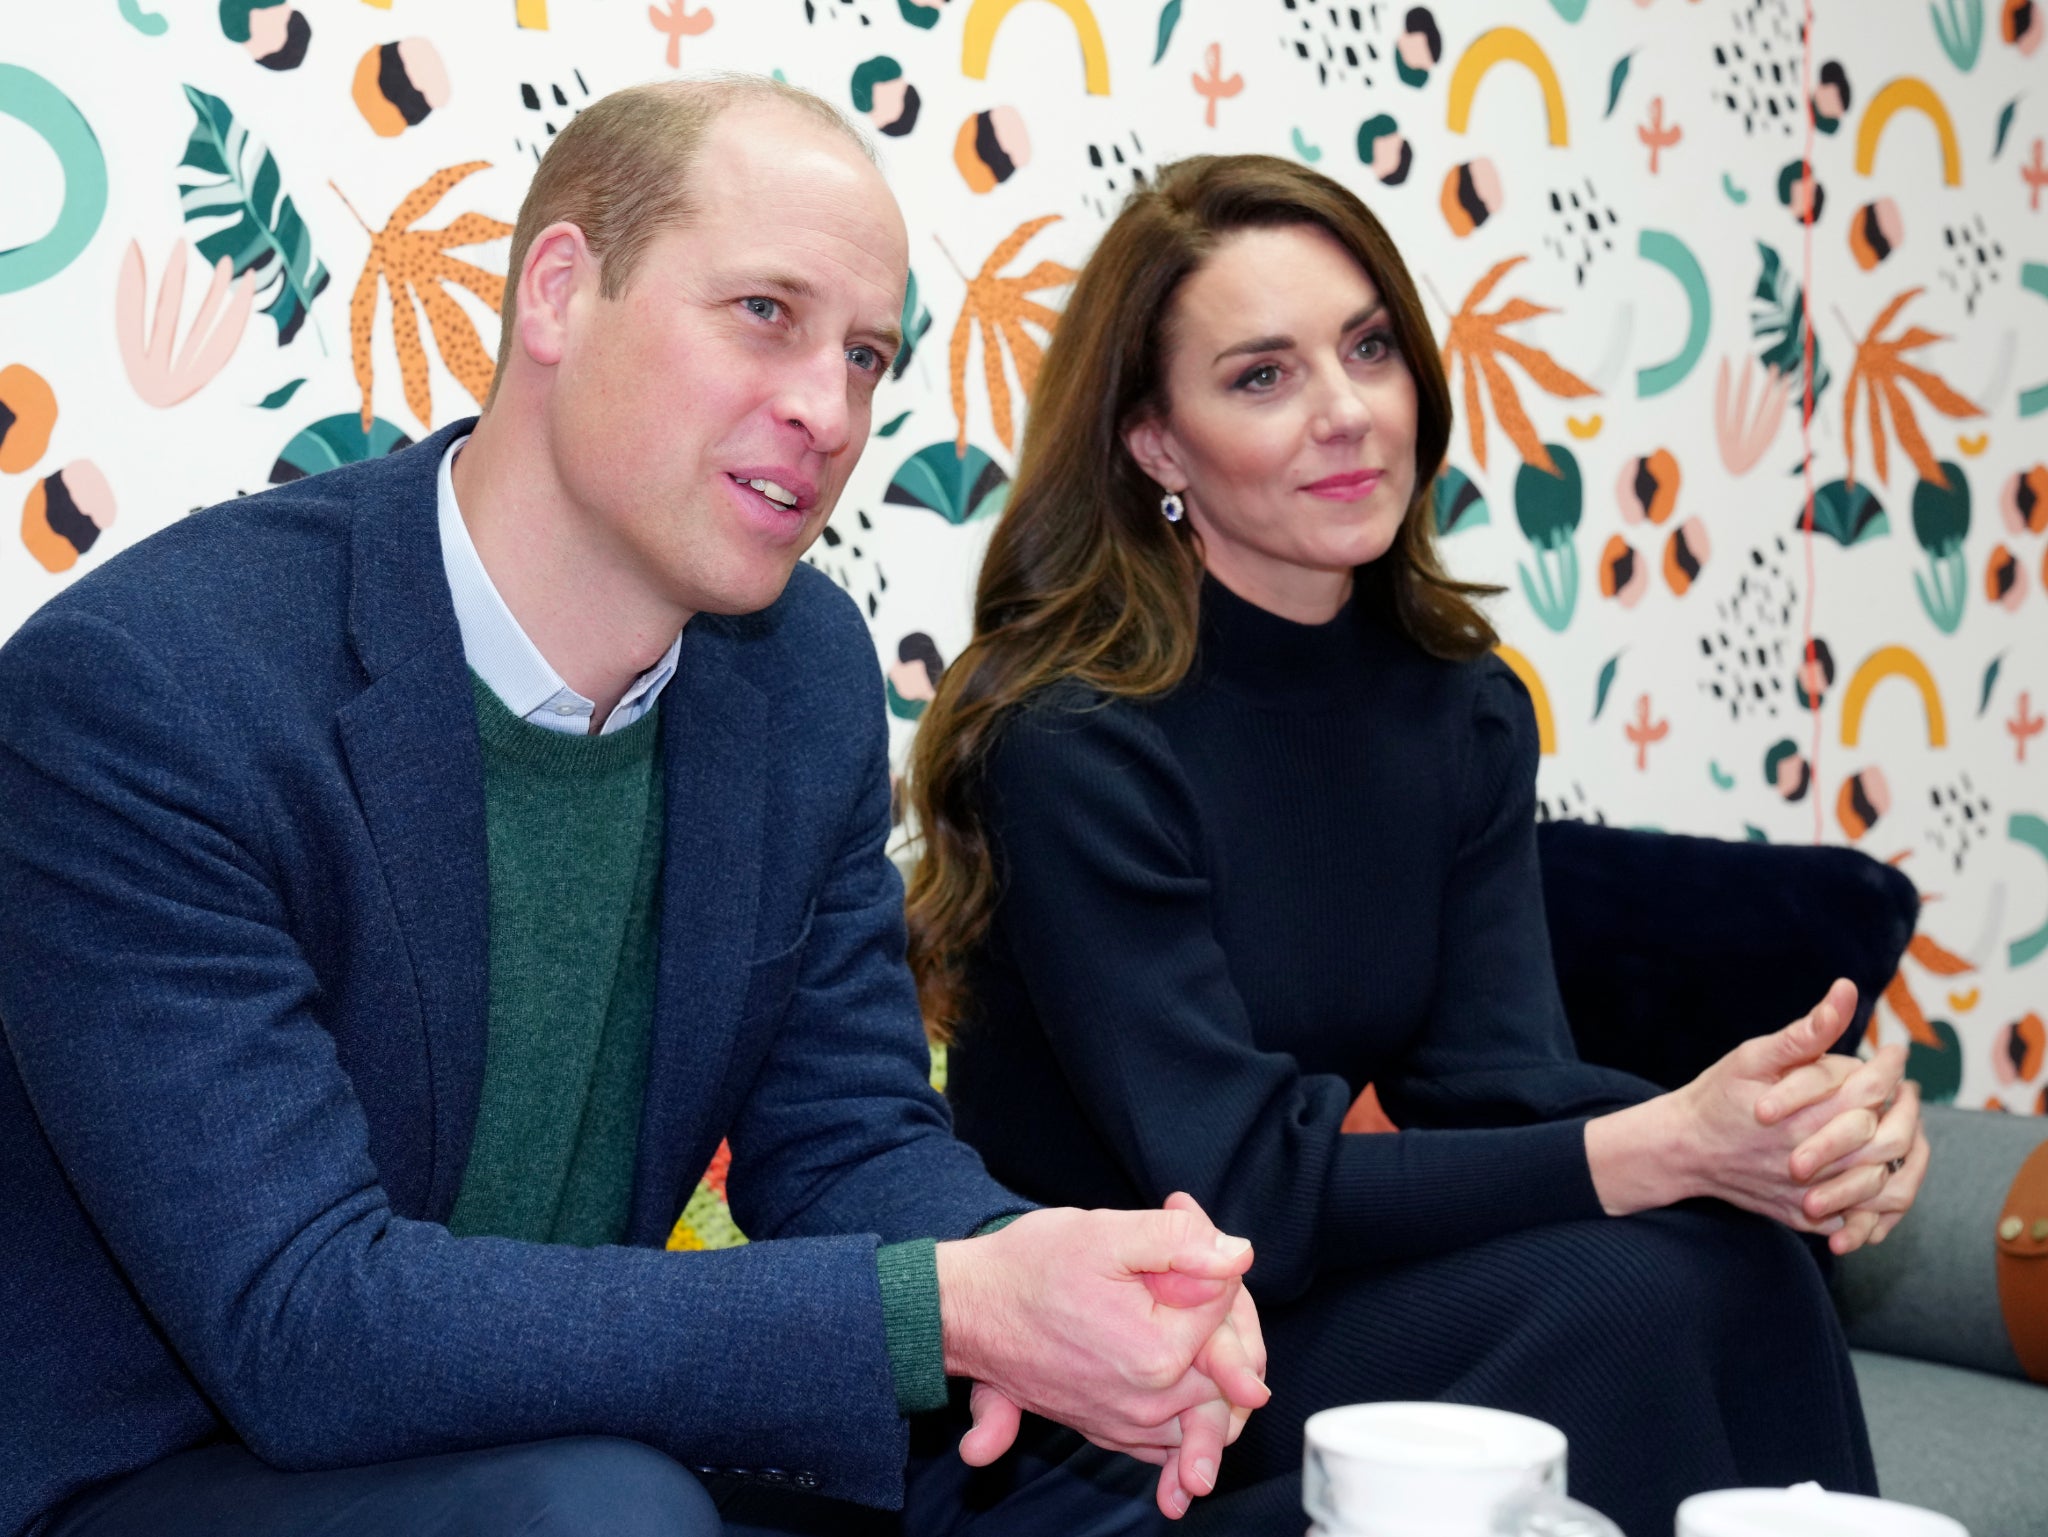 William and Kate visited Merseyside to thank those working in healthcare and mental health support for their work during the winter months